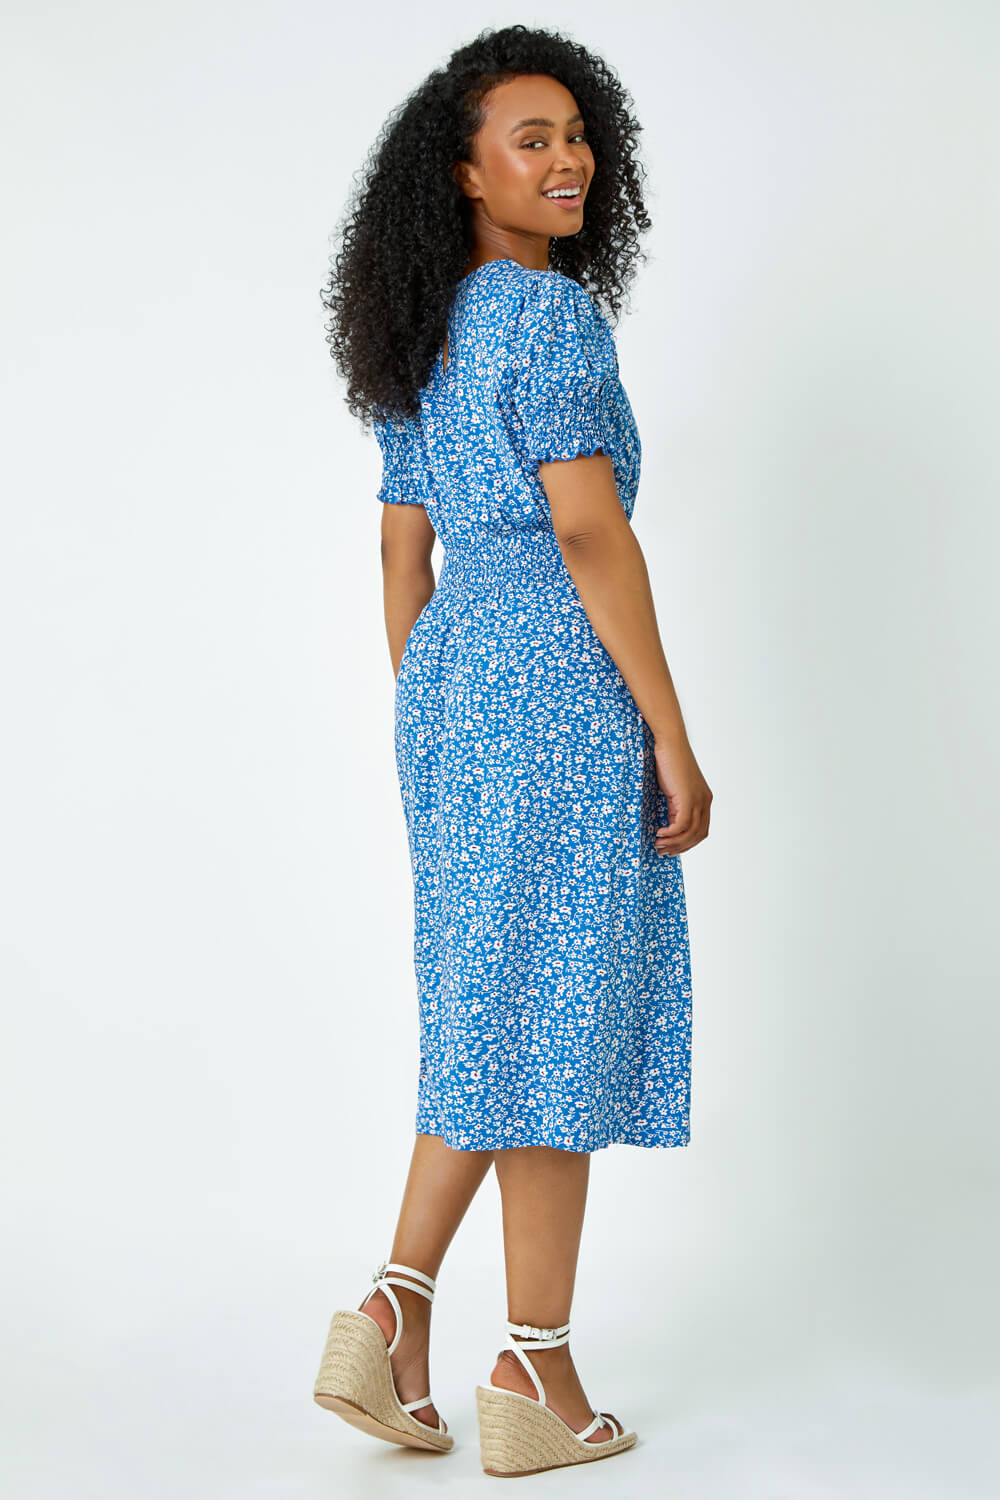 Blue Petite Ditsy Floral Stretch Dress, Image 3 of 5